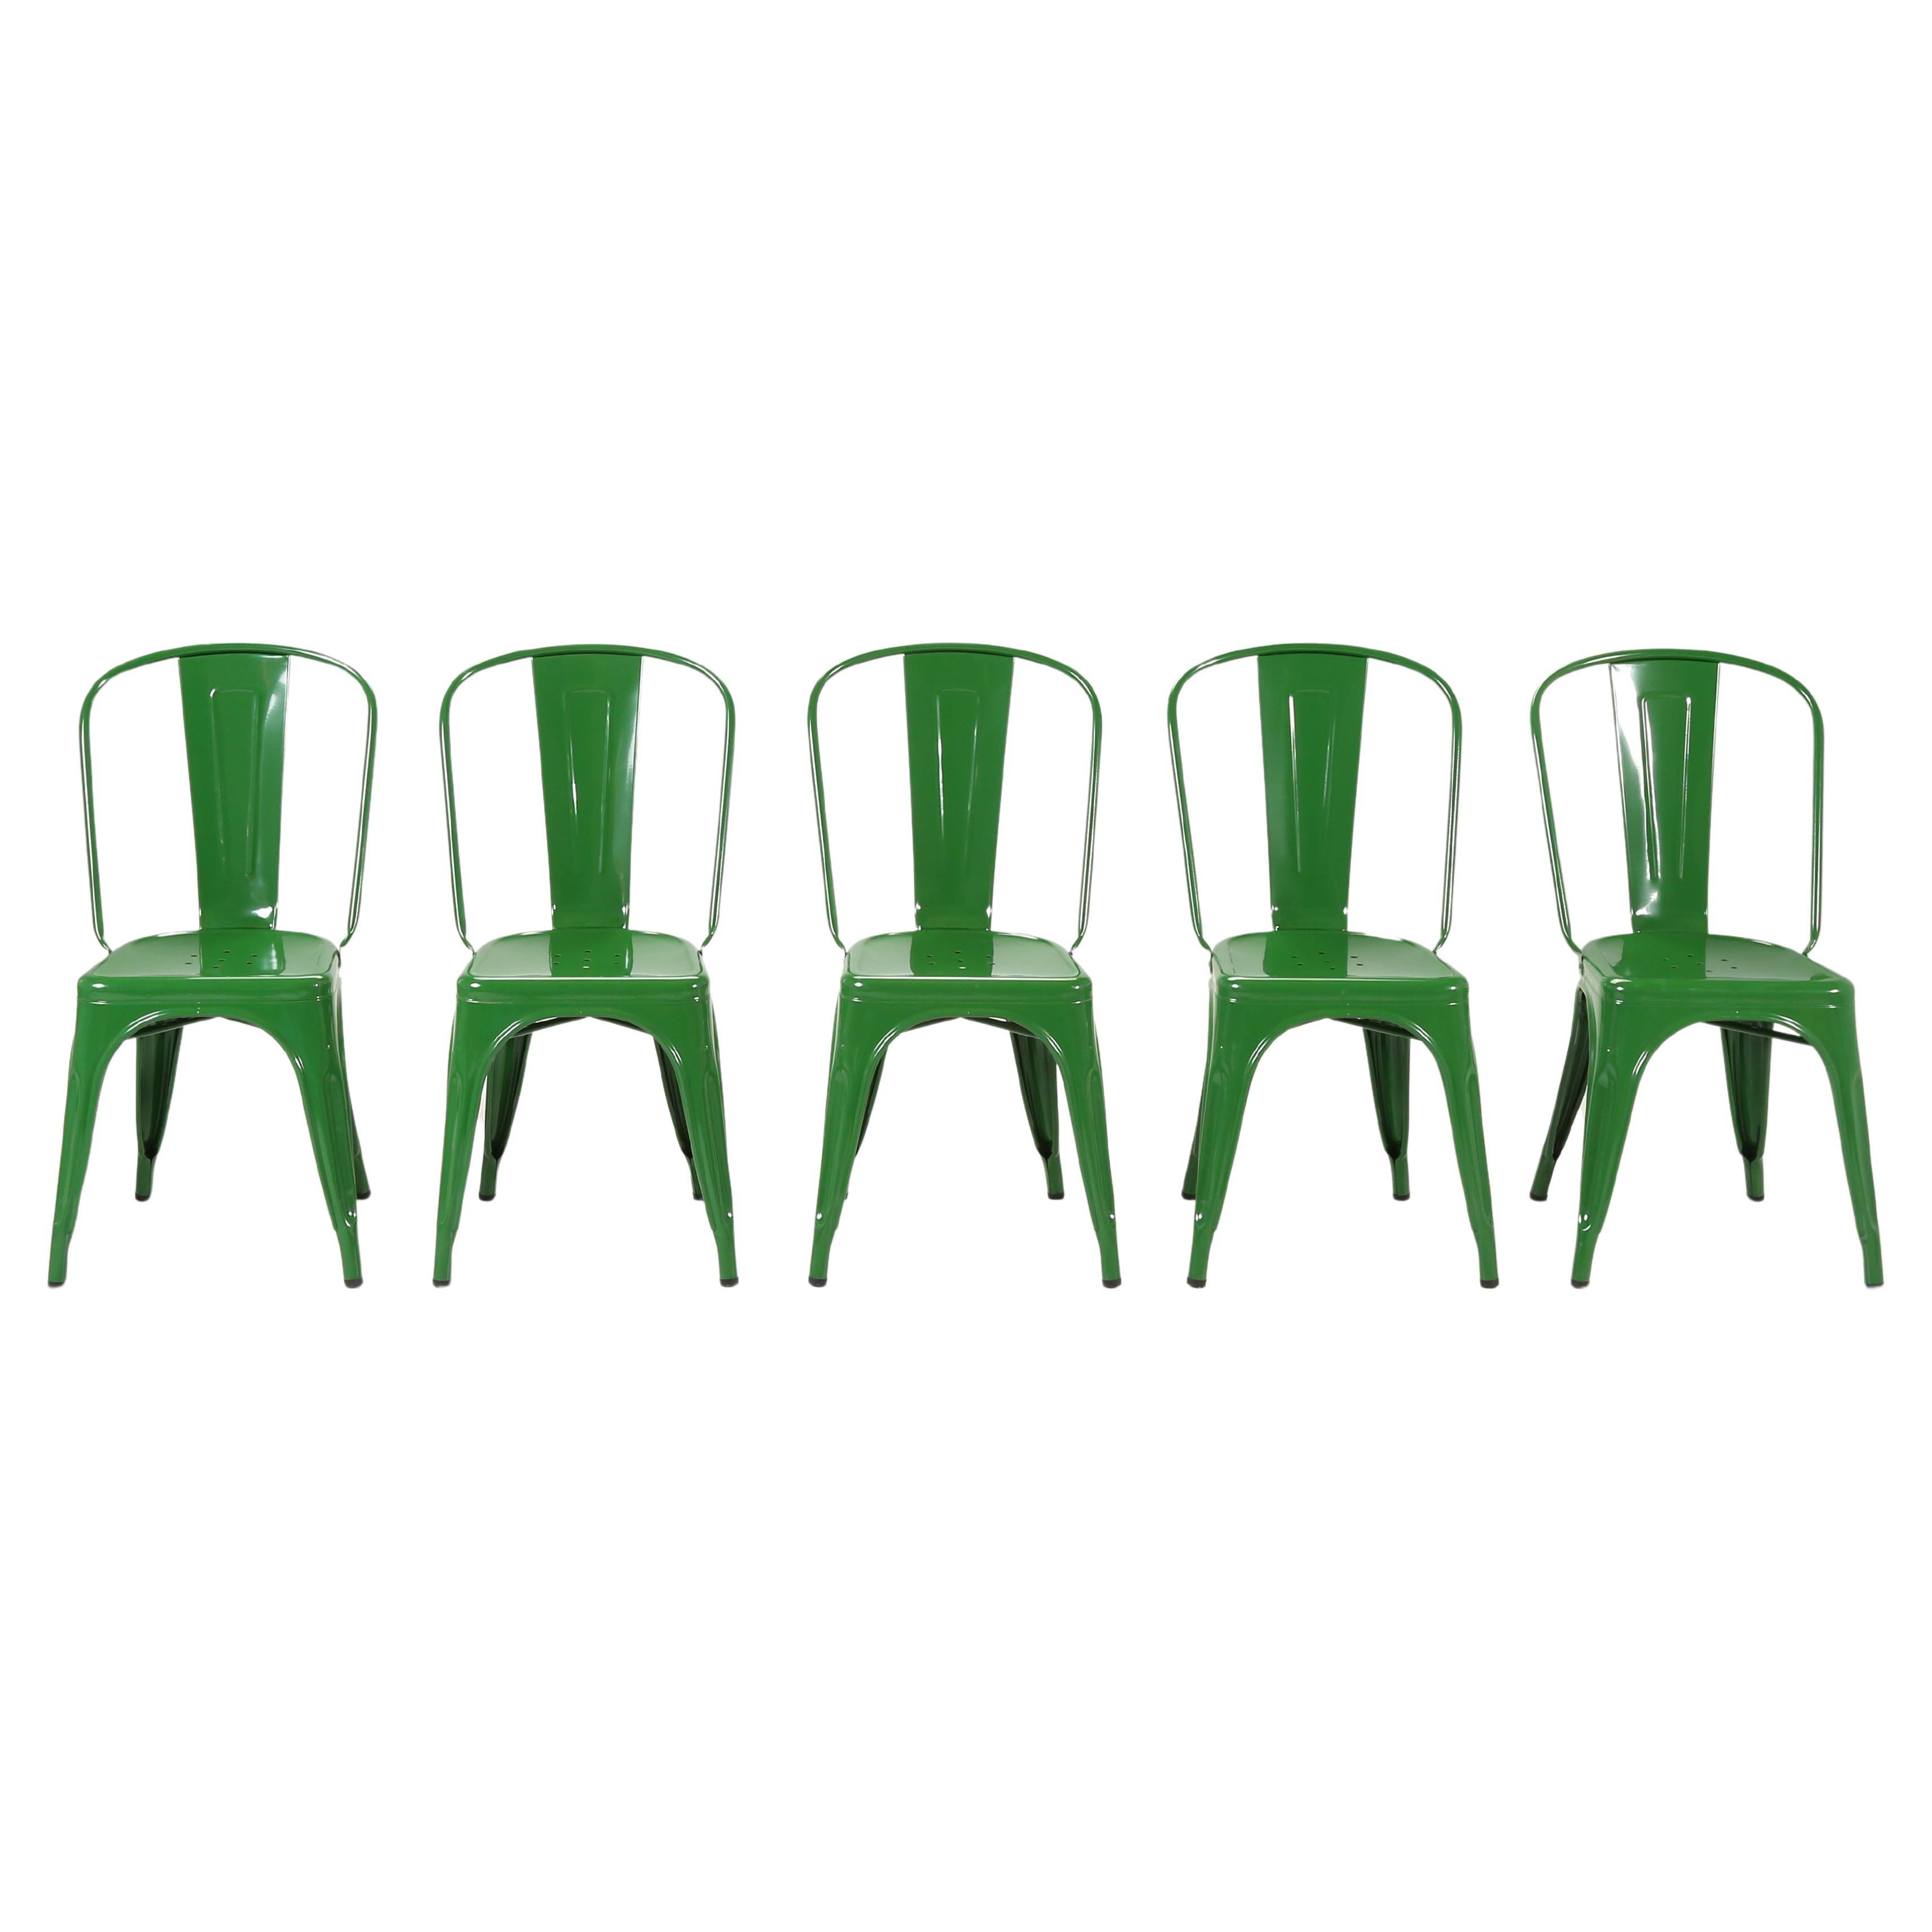 Genuine French Tolix Steel Stacking Chairs Set (5) in a Beautiful Bright Green For Sale